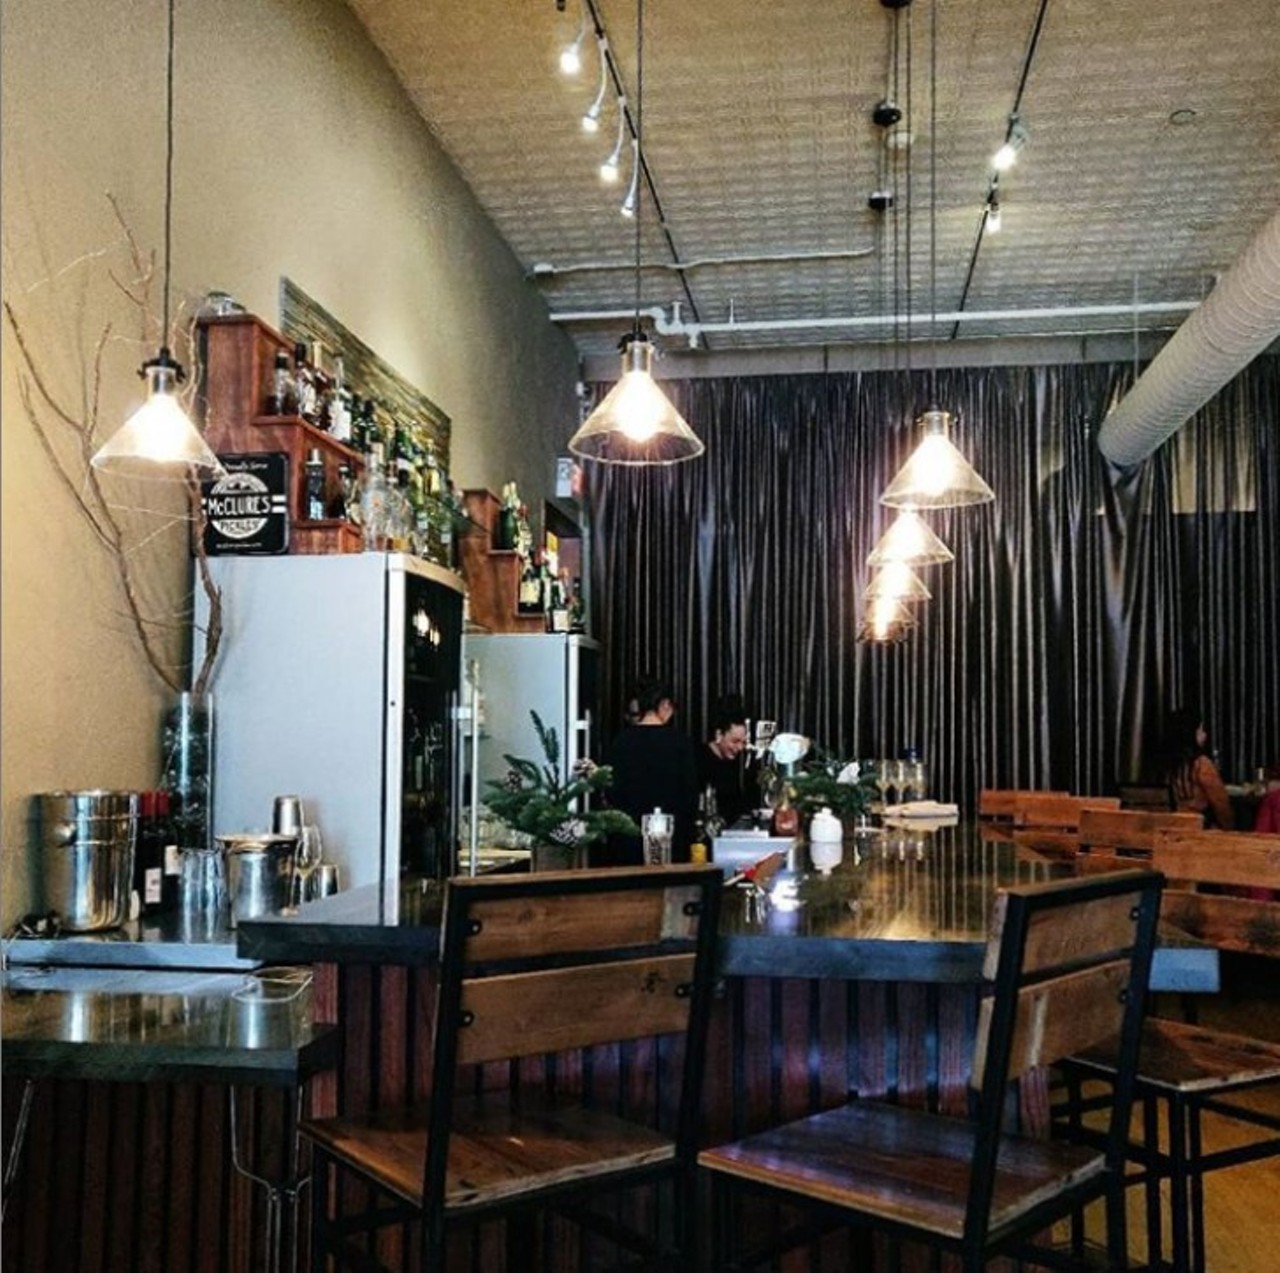 Caf&eacute; Muse
418 S. Washington Ave., Royal Oak
Located in Royal Oak, Caf&eacute; Muse is charming little place to stop by for a quick brunch.  If you&#146;re more in the mood for lunch, try their signature grilled cheese. 
Photo courtesy of @thelajicallife